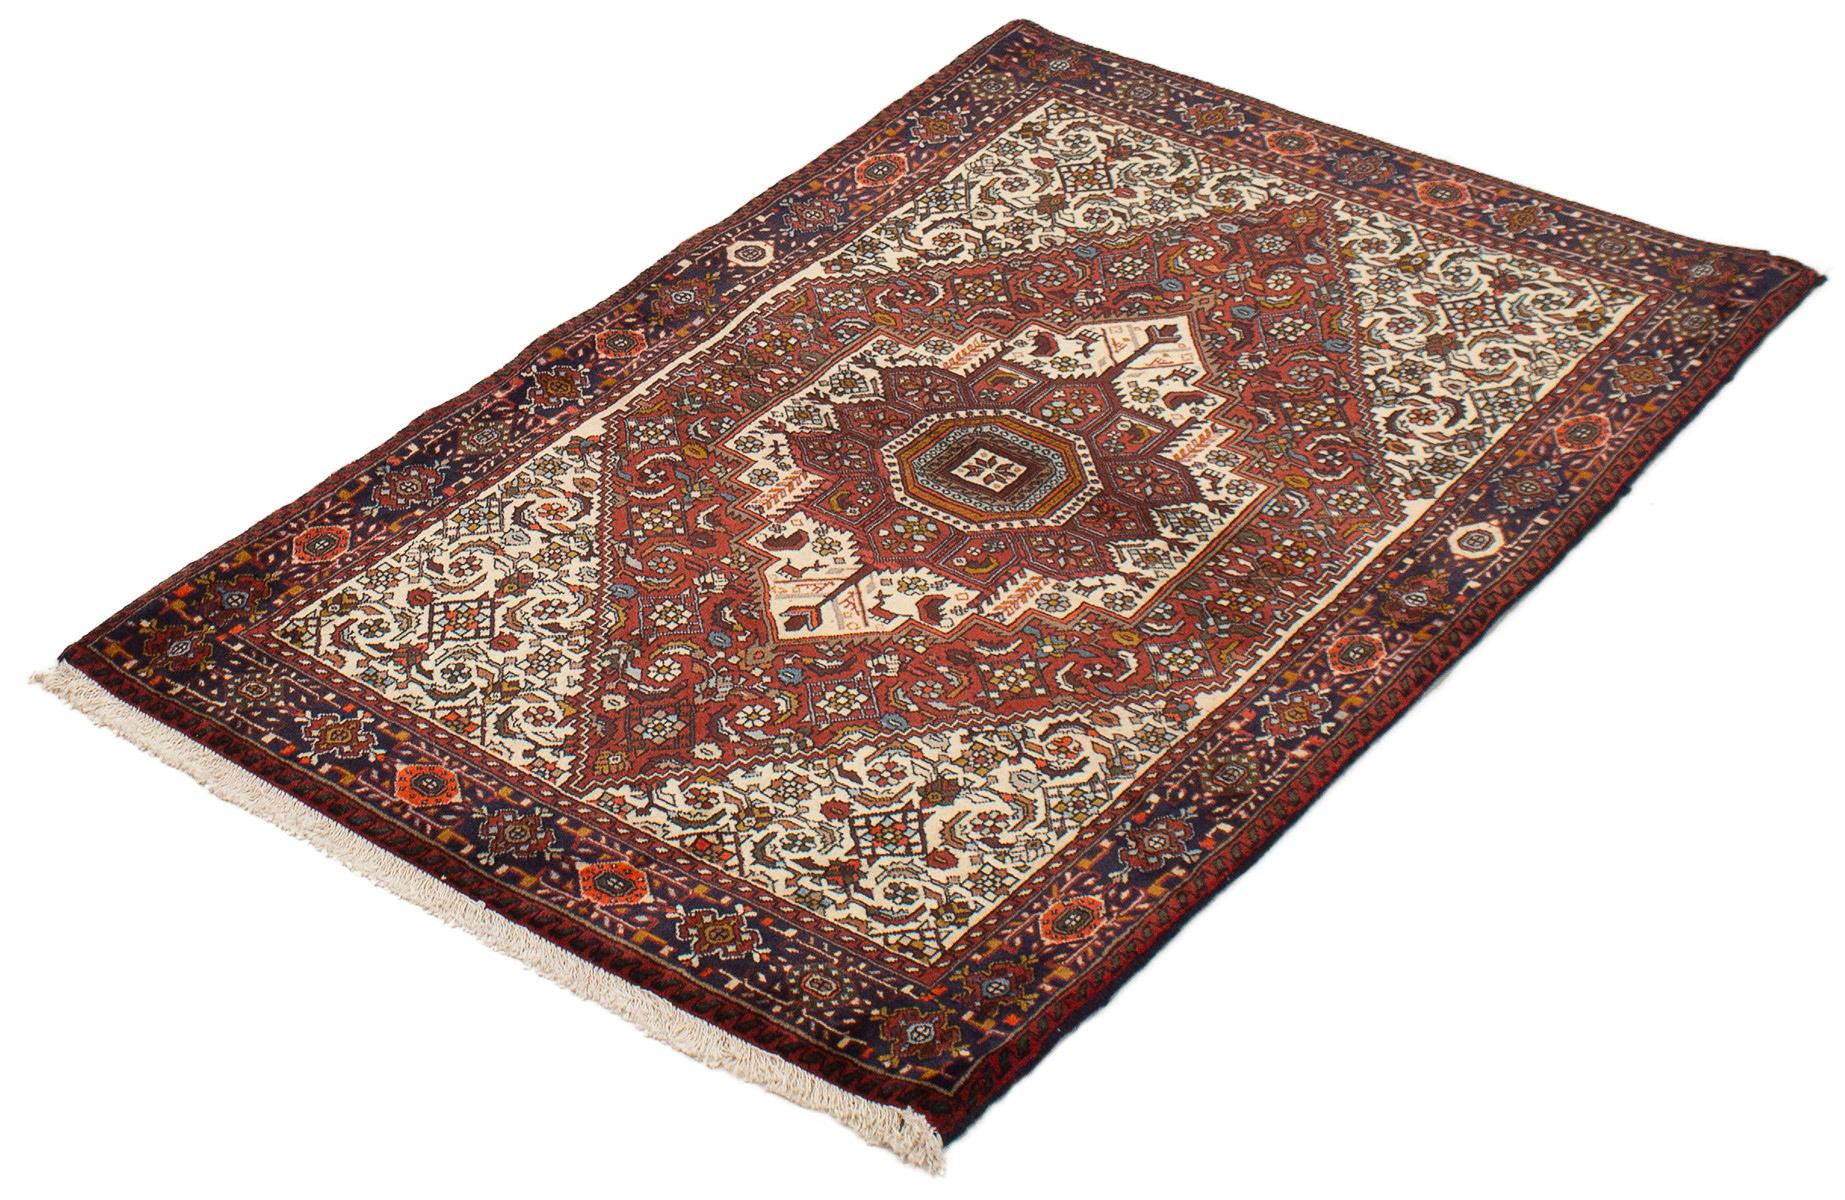 This vintage Wool Persian Bidgeneh rug measures 3'3 x 5'0 and was handwoven in the 1980s. It features vegetable-dyed hues of red, black and gray along with a floral medallion in the center. This is a rug that is in good vintage condition.
Orley